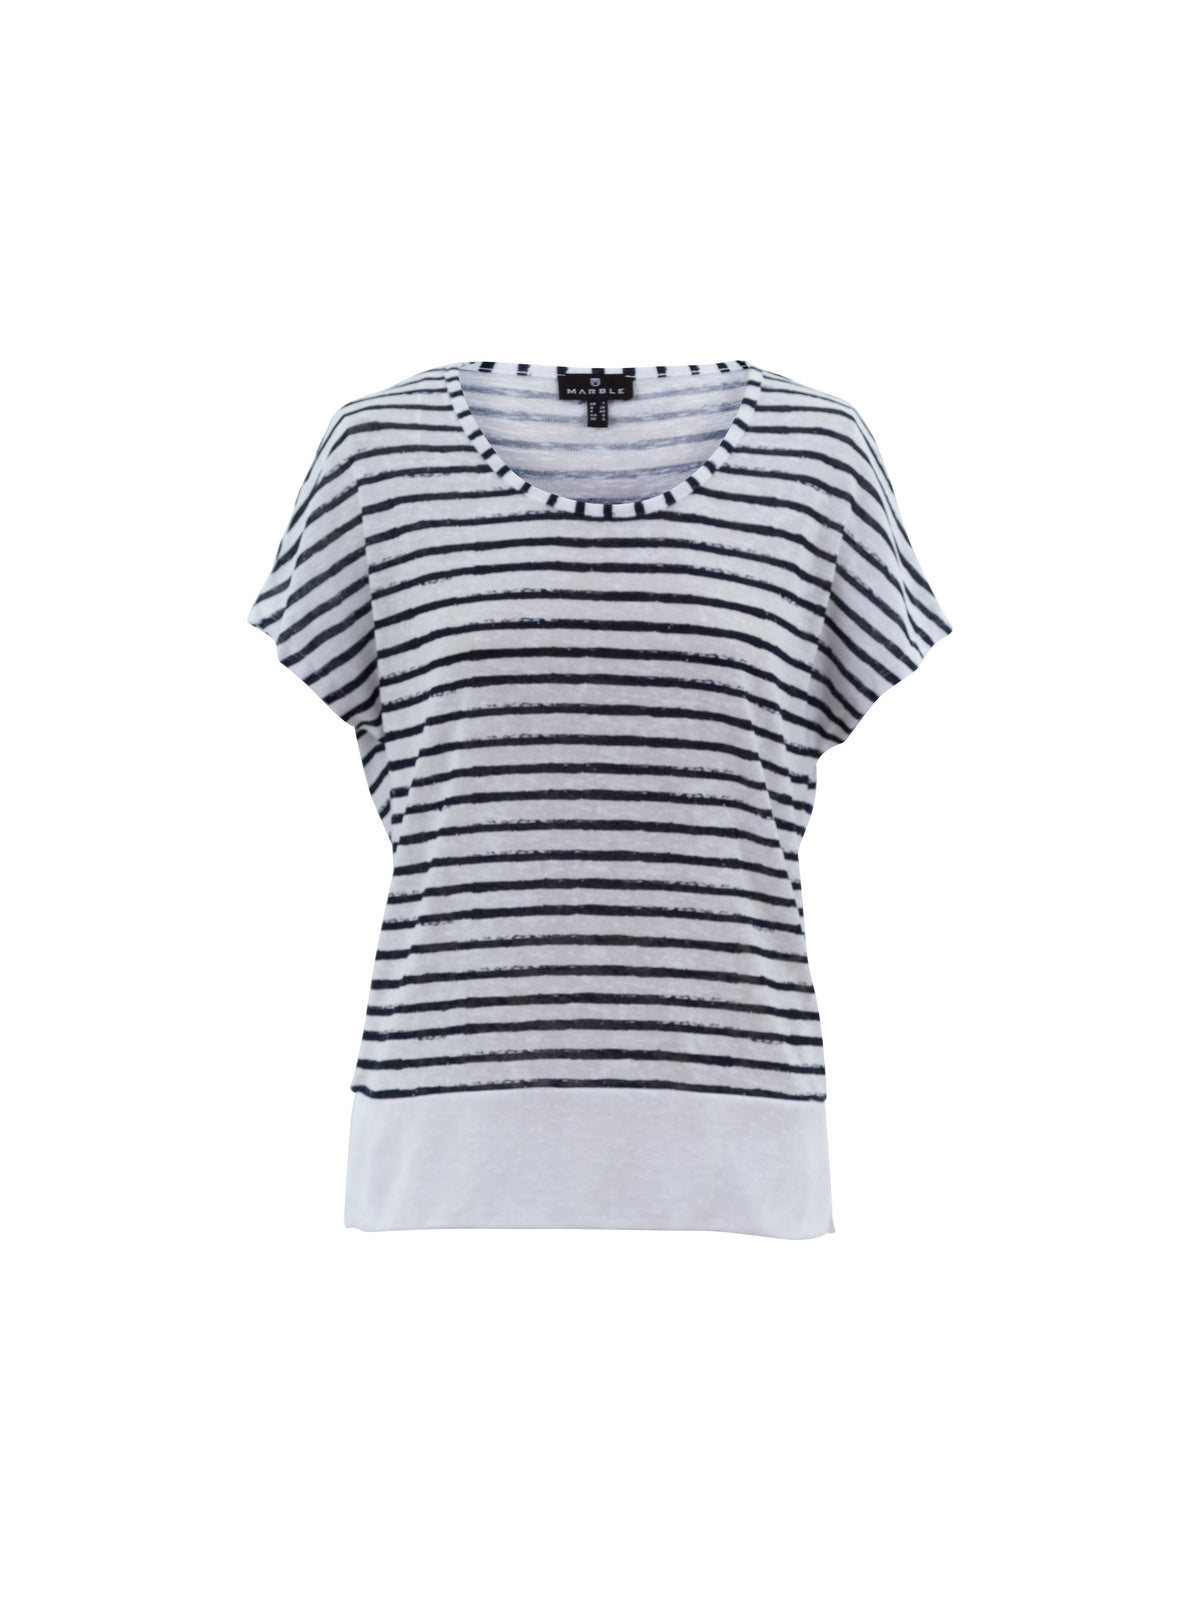 Marble Navy and White Striped Short Sleeve Top